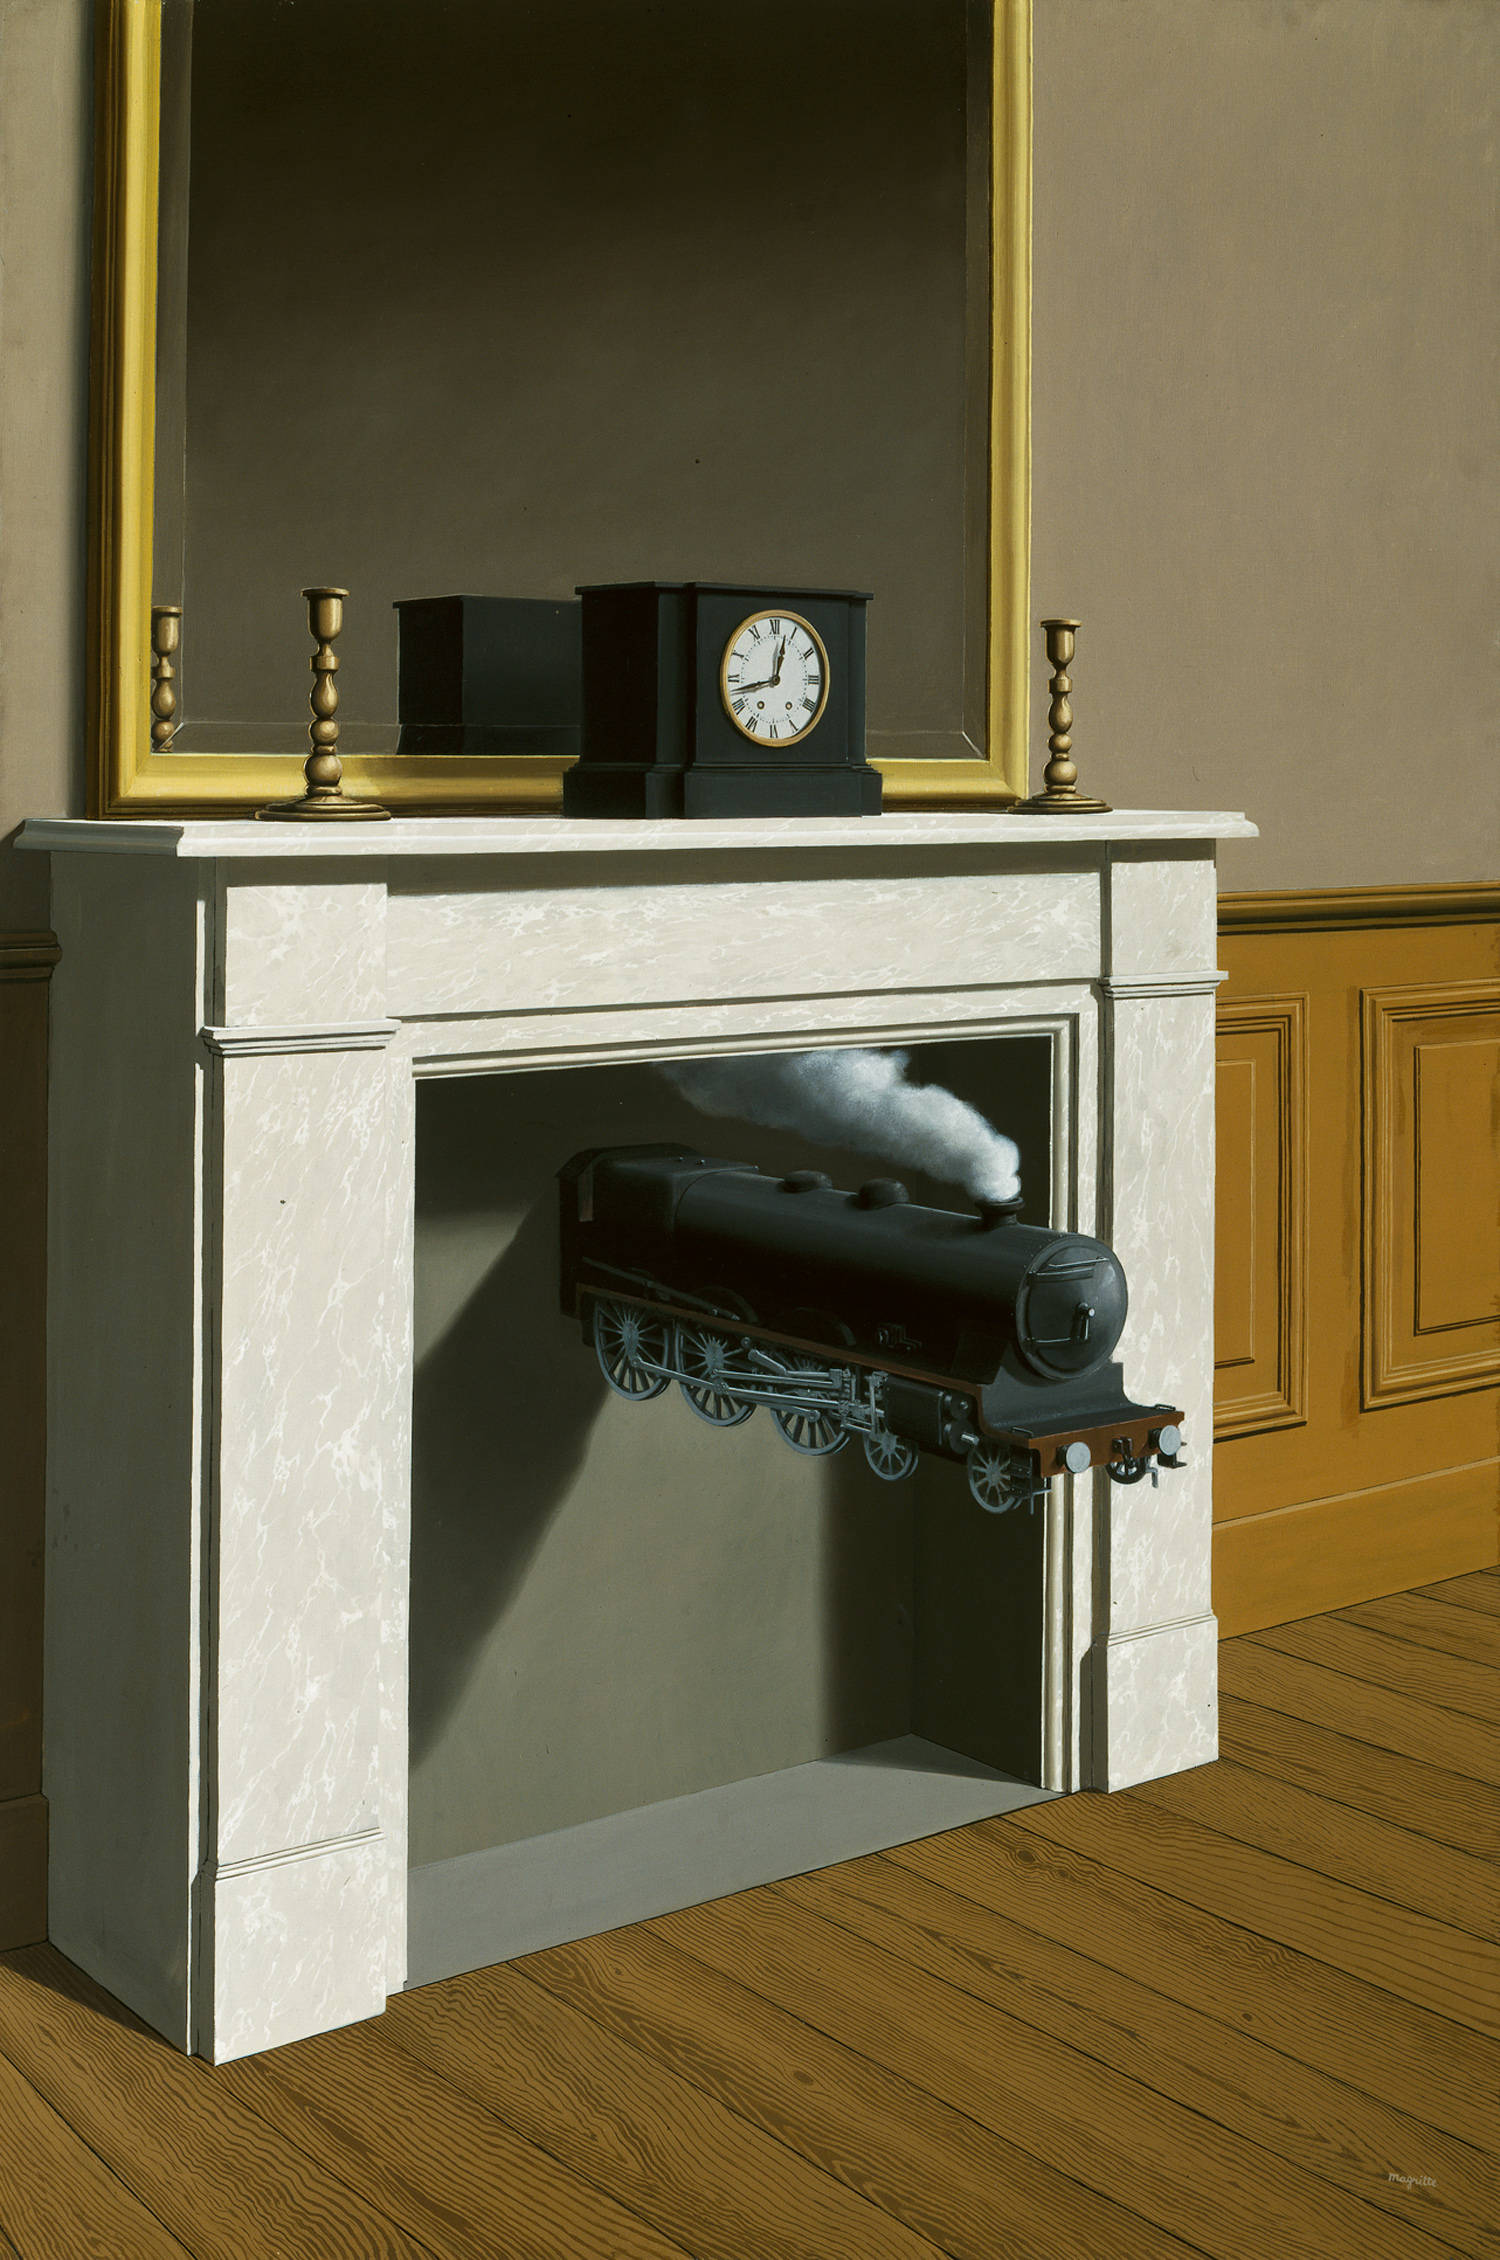 Rene Magritte - Time Transfixed 1938